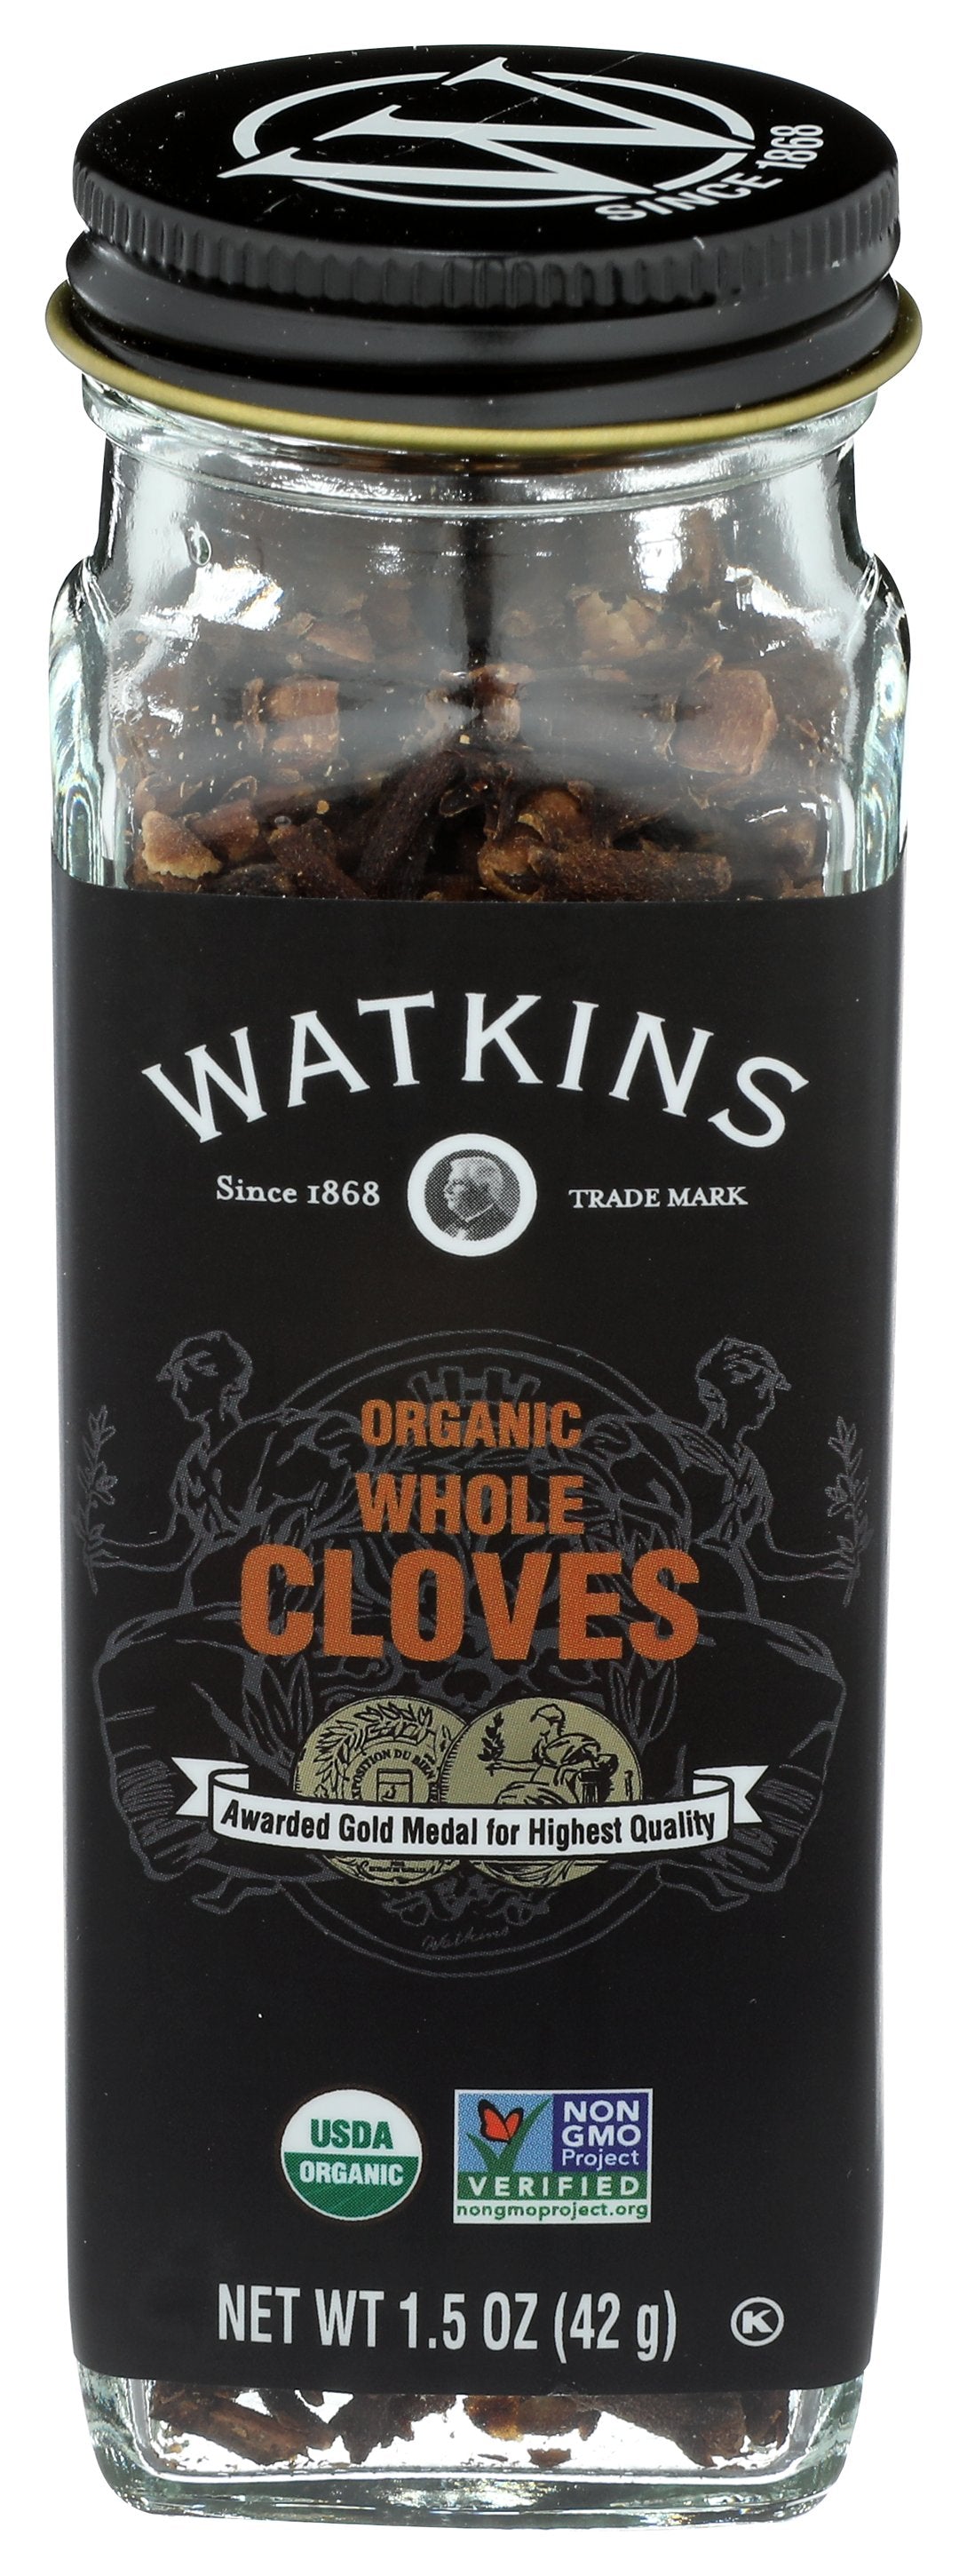 WATKINS CLOVES WHOLE ORG - Case of 3